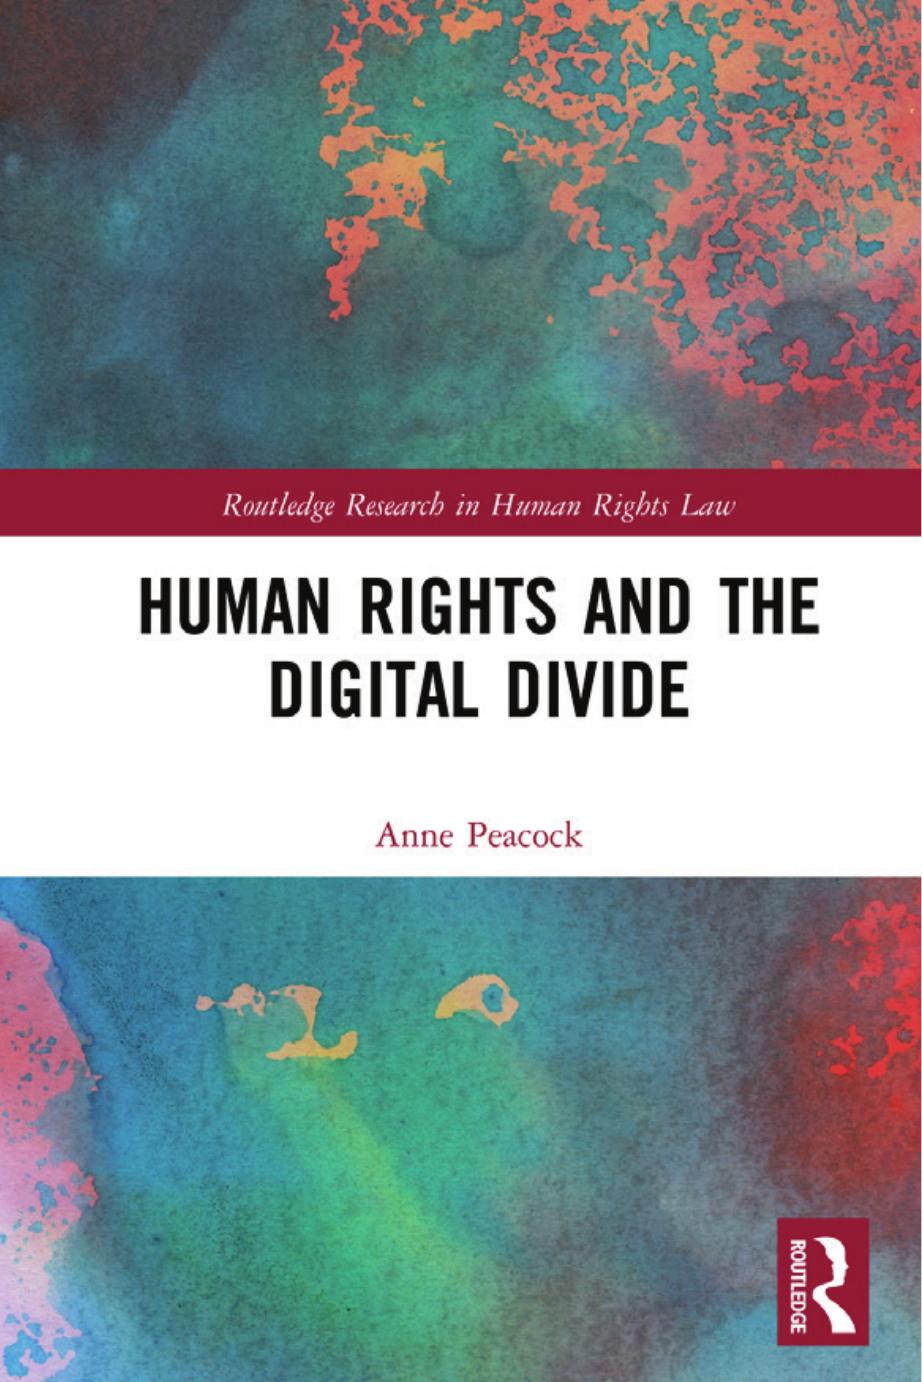 Human Rights and the Digital Divide(Routledge Research in Human Rights Law) 1st Edition by Anne Peacock